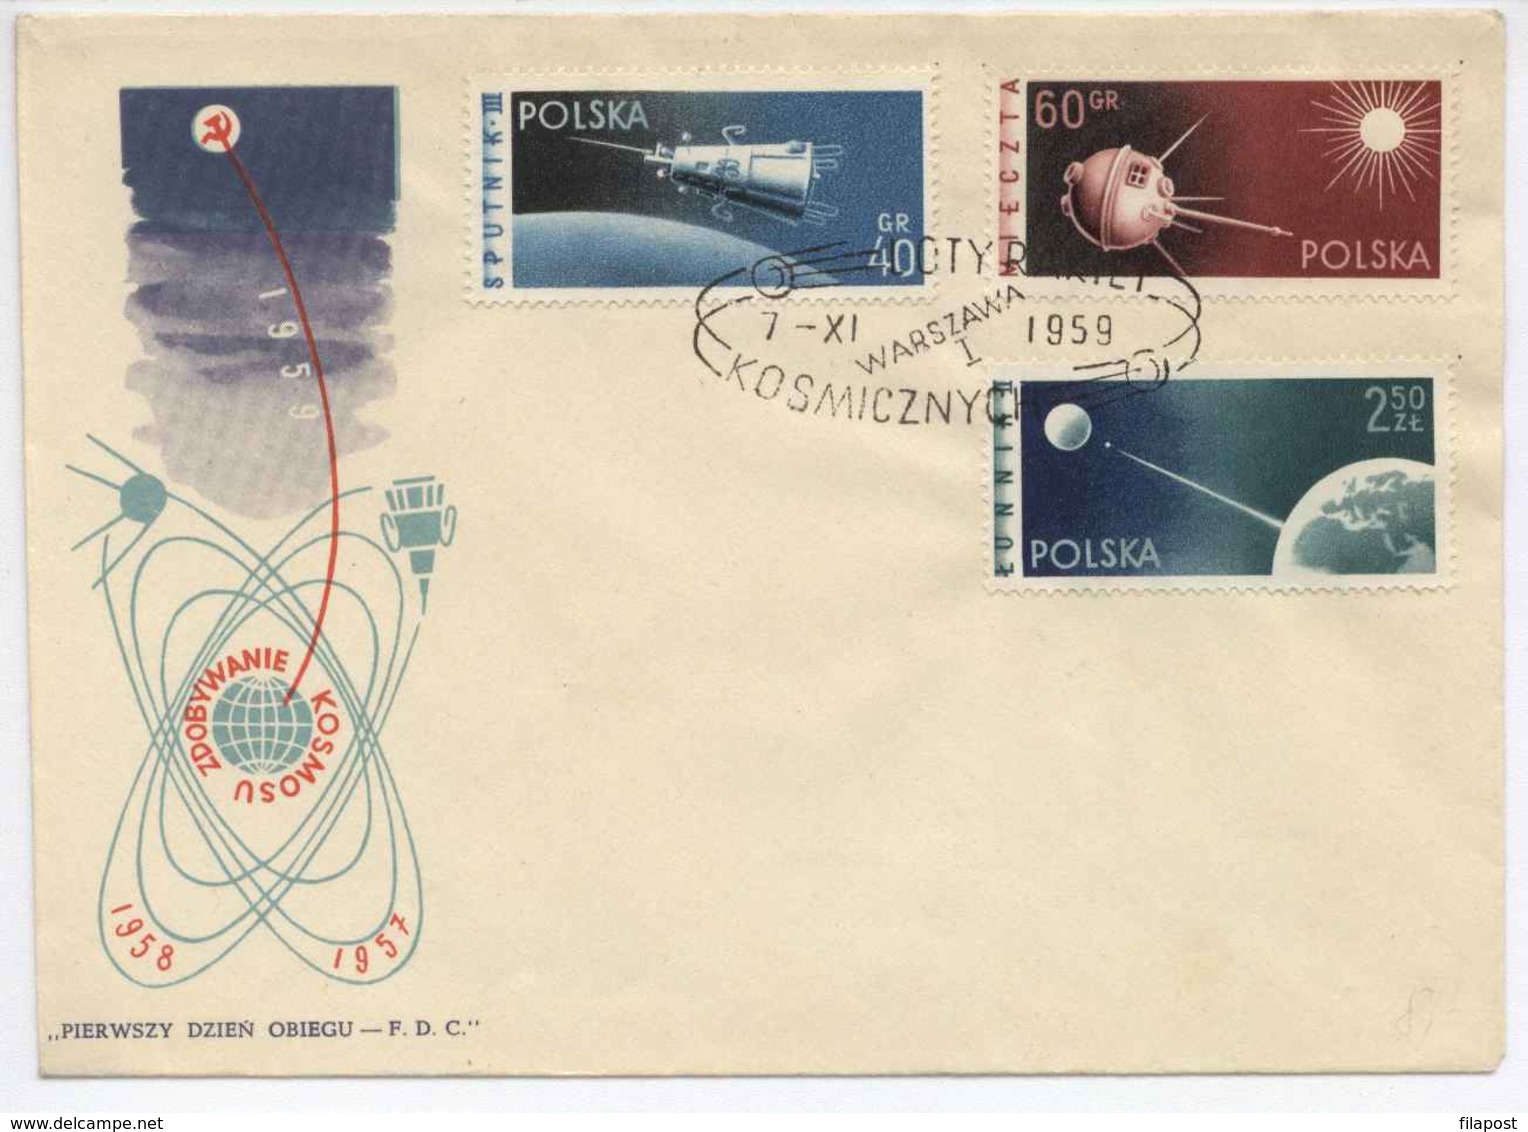 Poland 1959 Cosmos Astronomy / Kosmos Astronomie / Perforated Stamps FDC H424 - Astronomy